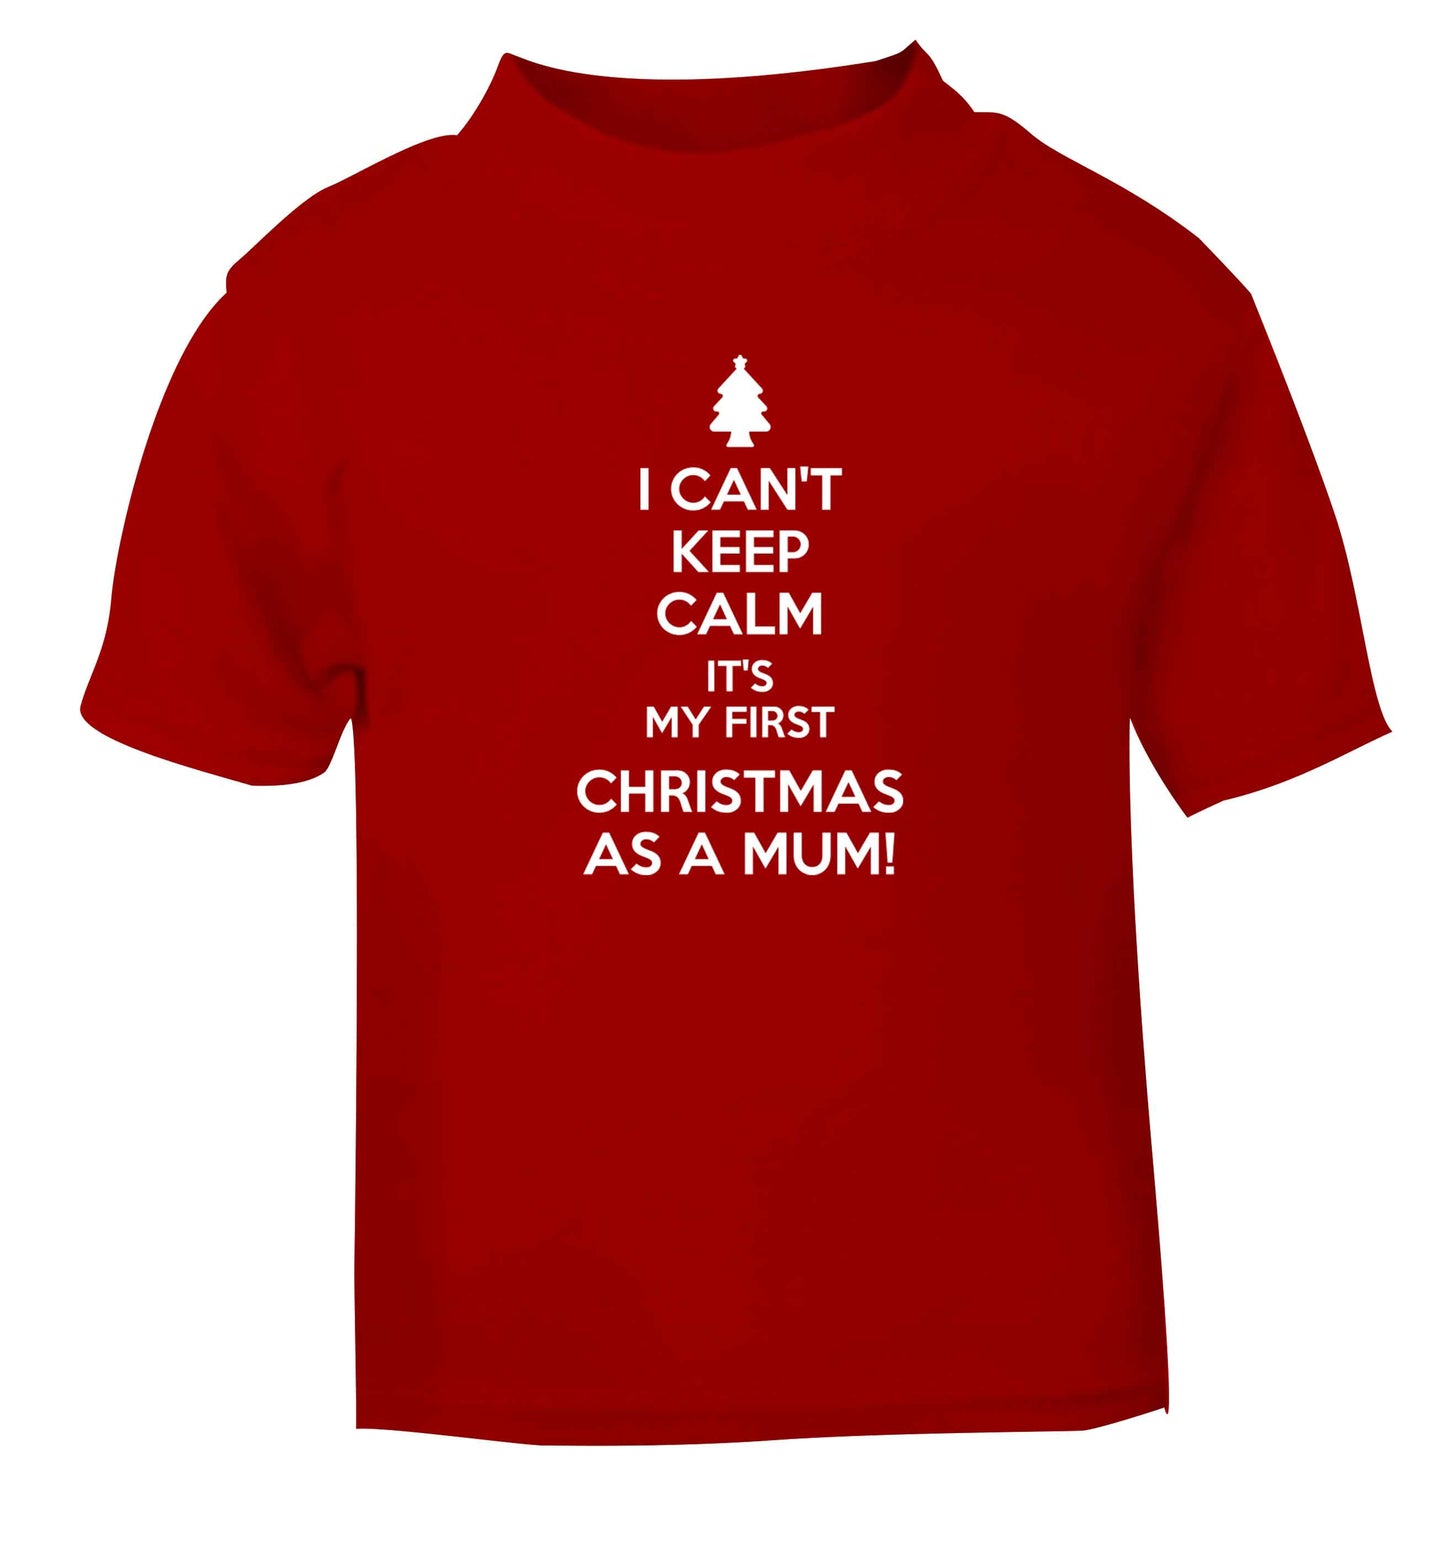 I can't keep calm it's my first Christmas as a mum red Baby Toddler Tshirt 2 Years